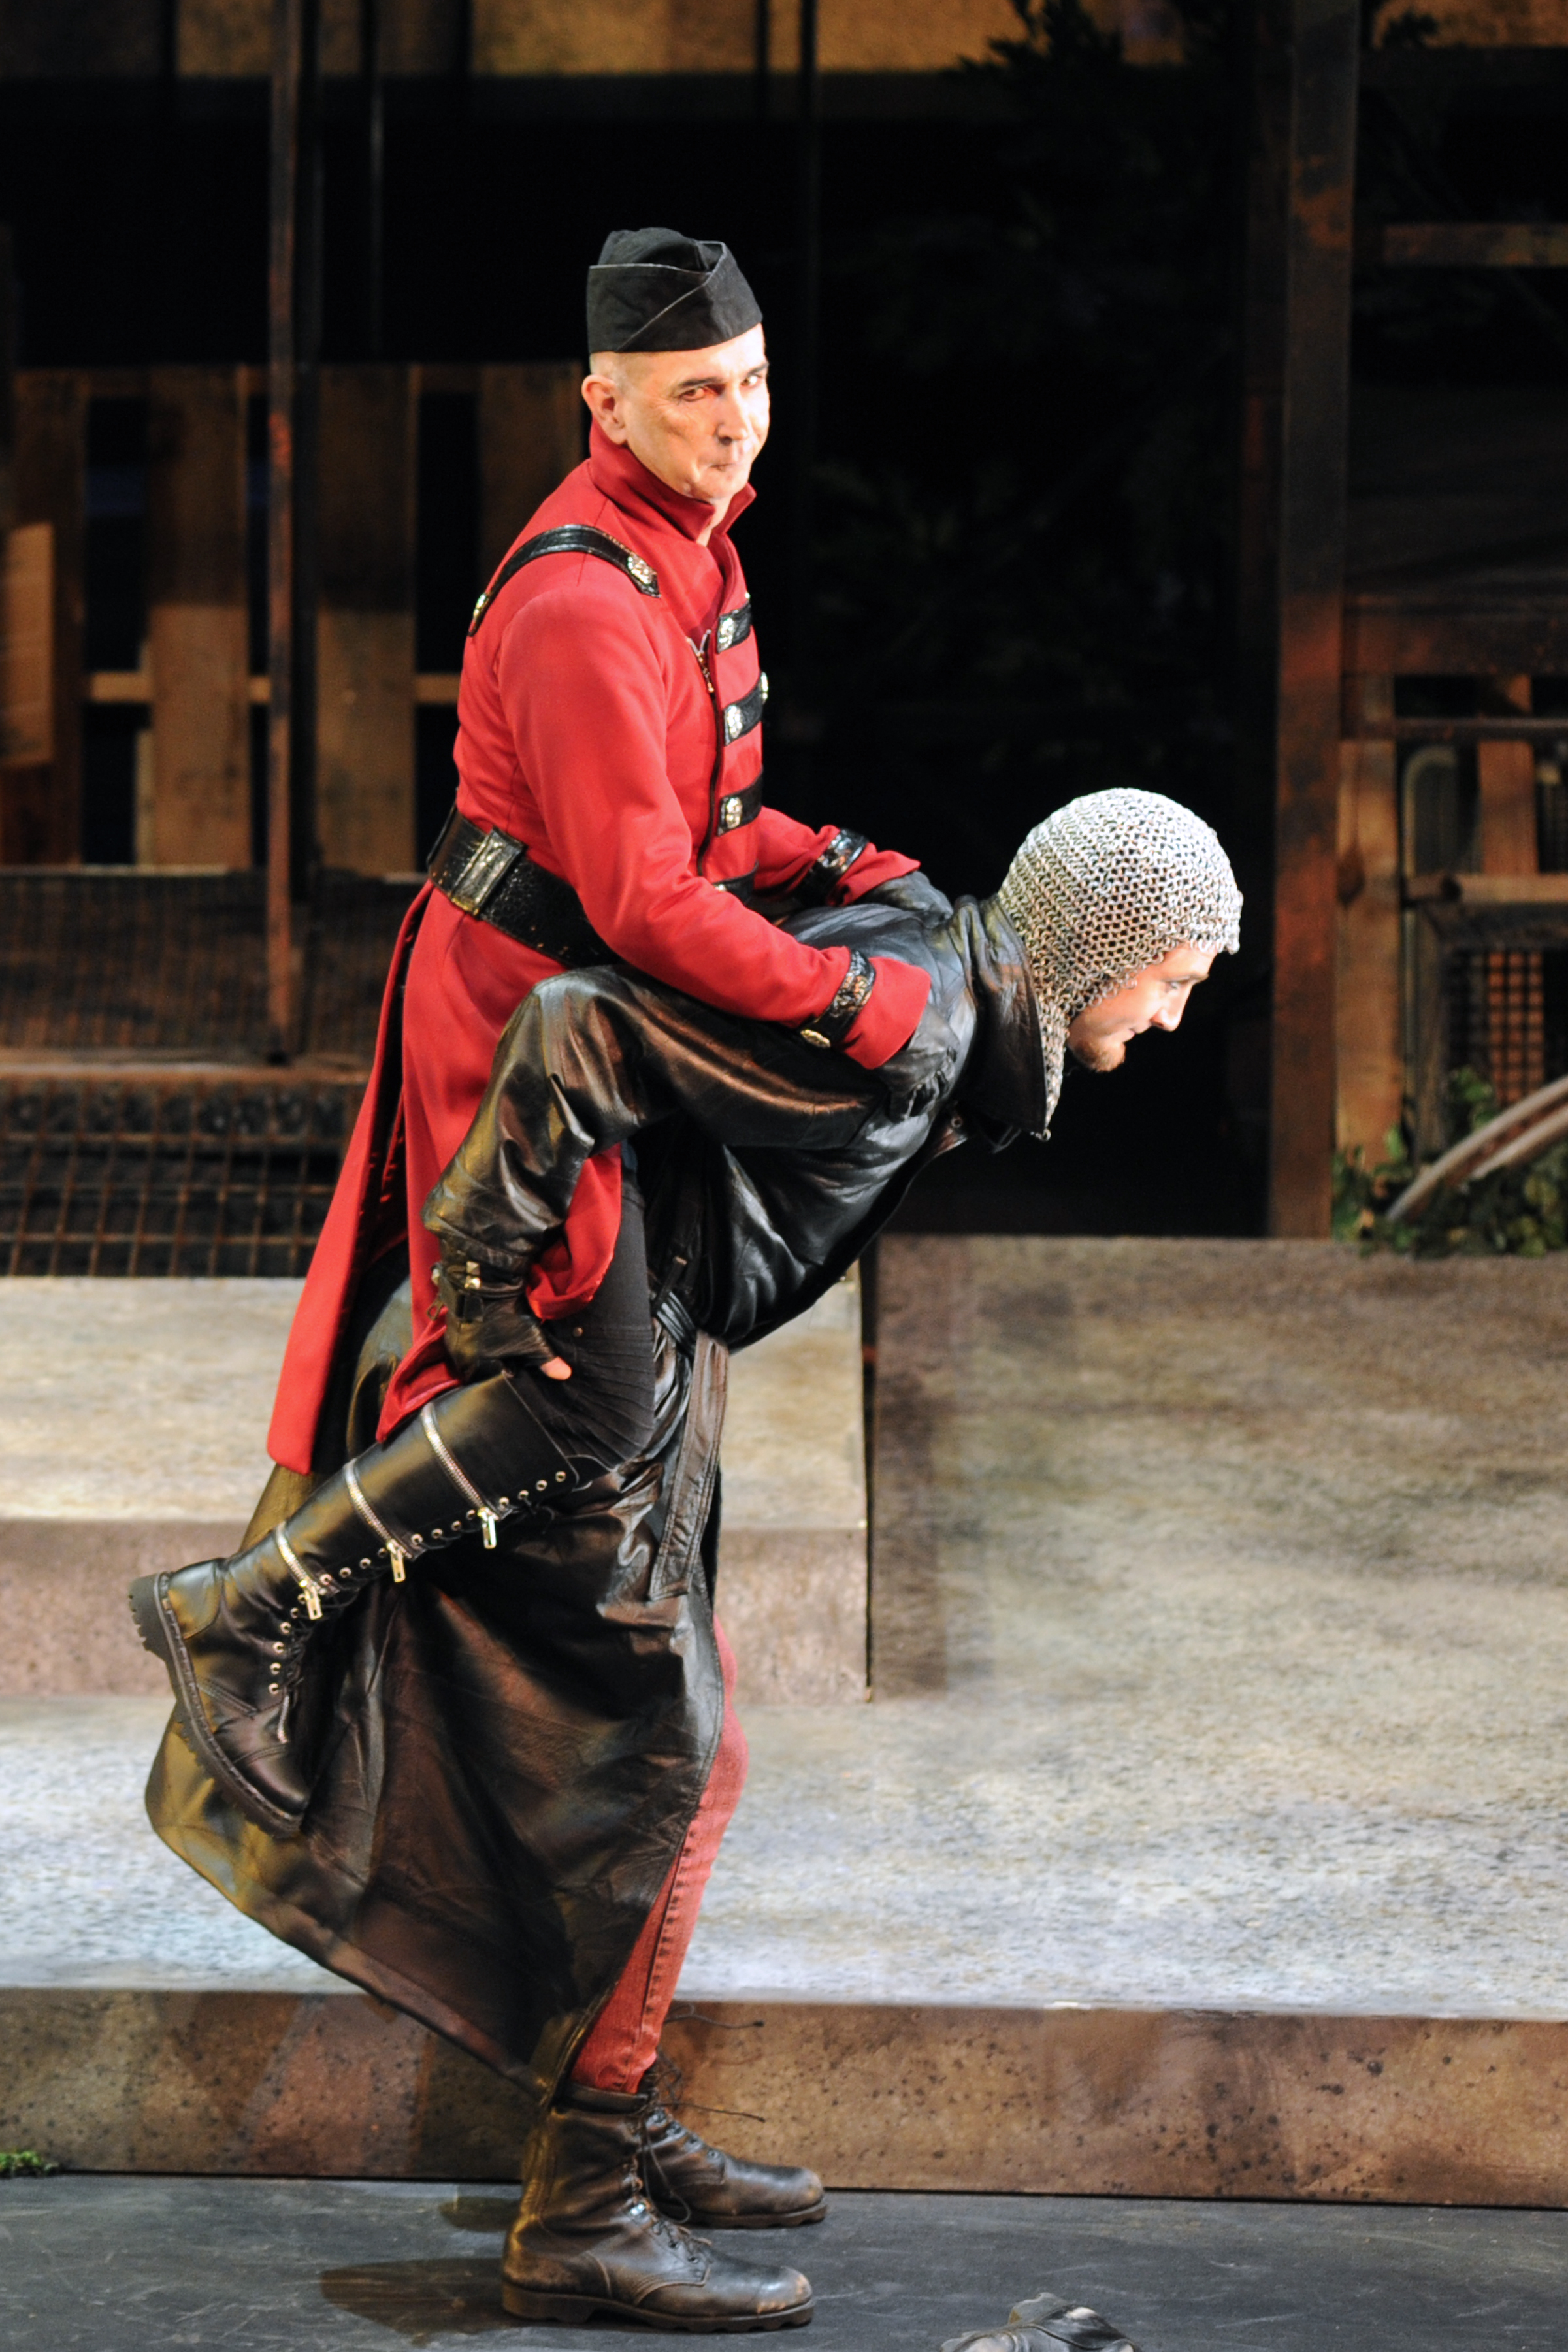 Jon Gentry has some fun in Childsplay's 2014 production of "Robin Hood." (Photo by Tim Trumble)